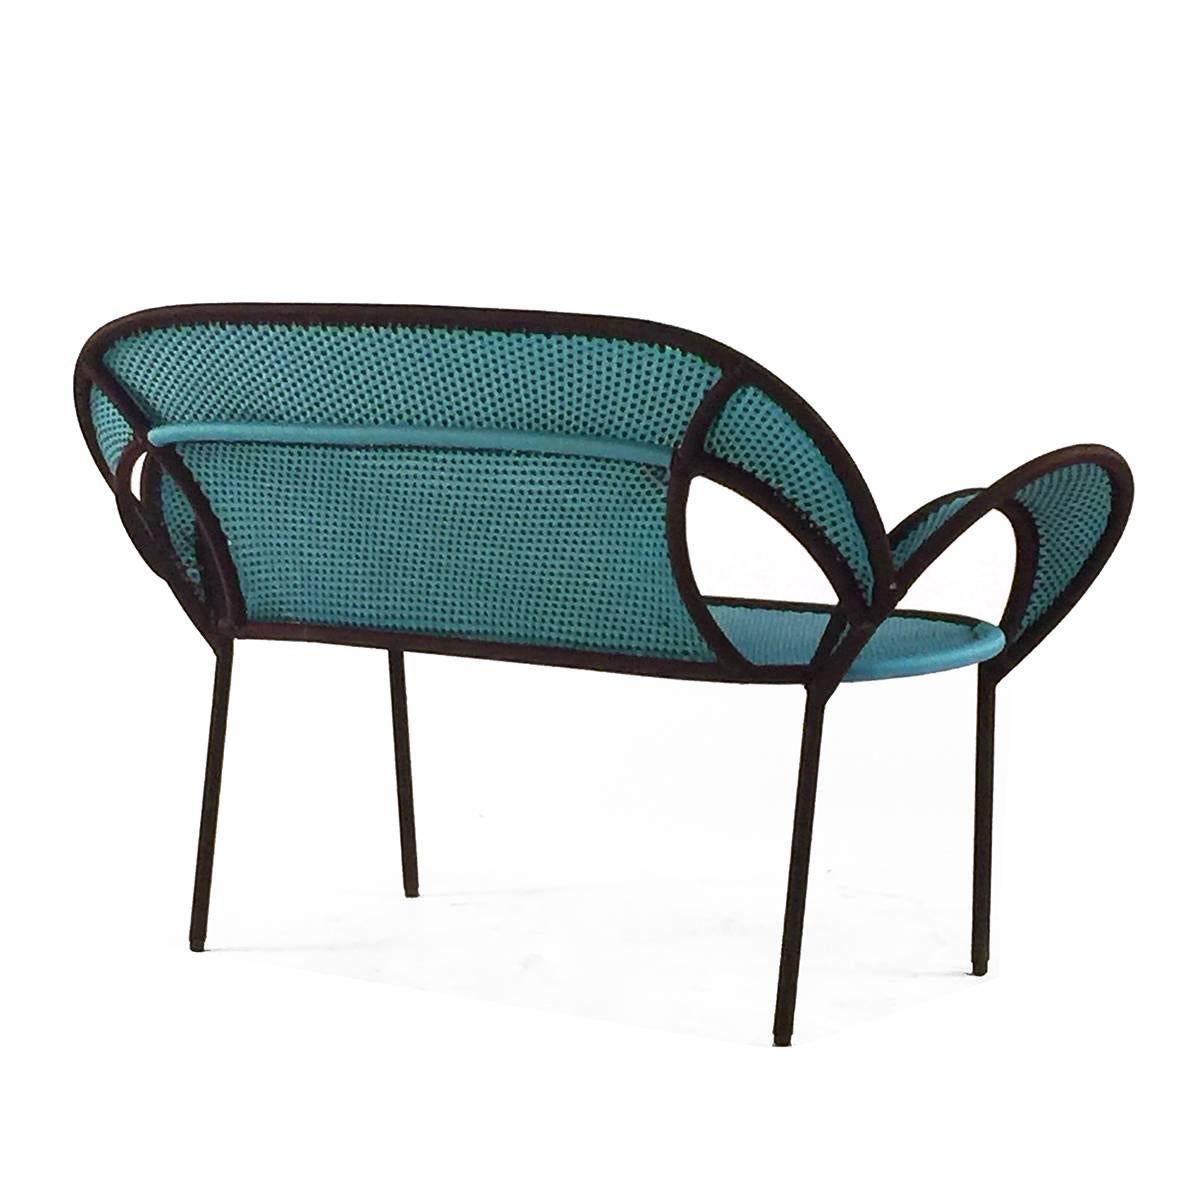 The shape of the chair and particularly the armrests, is inspired by the mating dance of male ostriches -Banjooli in the Wolof language- who stretch out their wings to show off their beauty to the female. Banjooli is part of M'Afrique, a range of